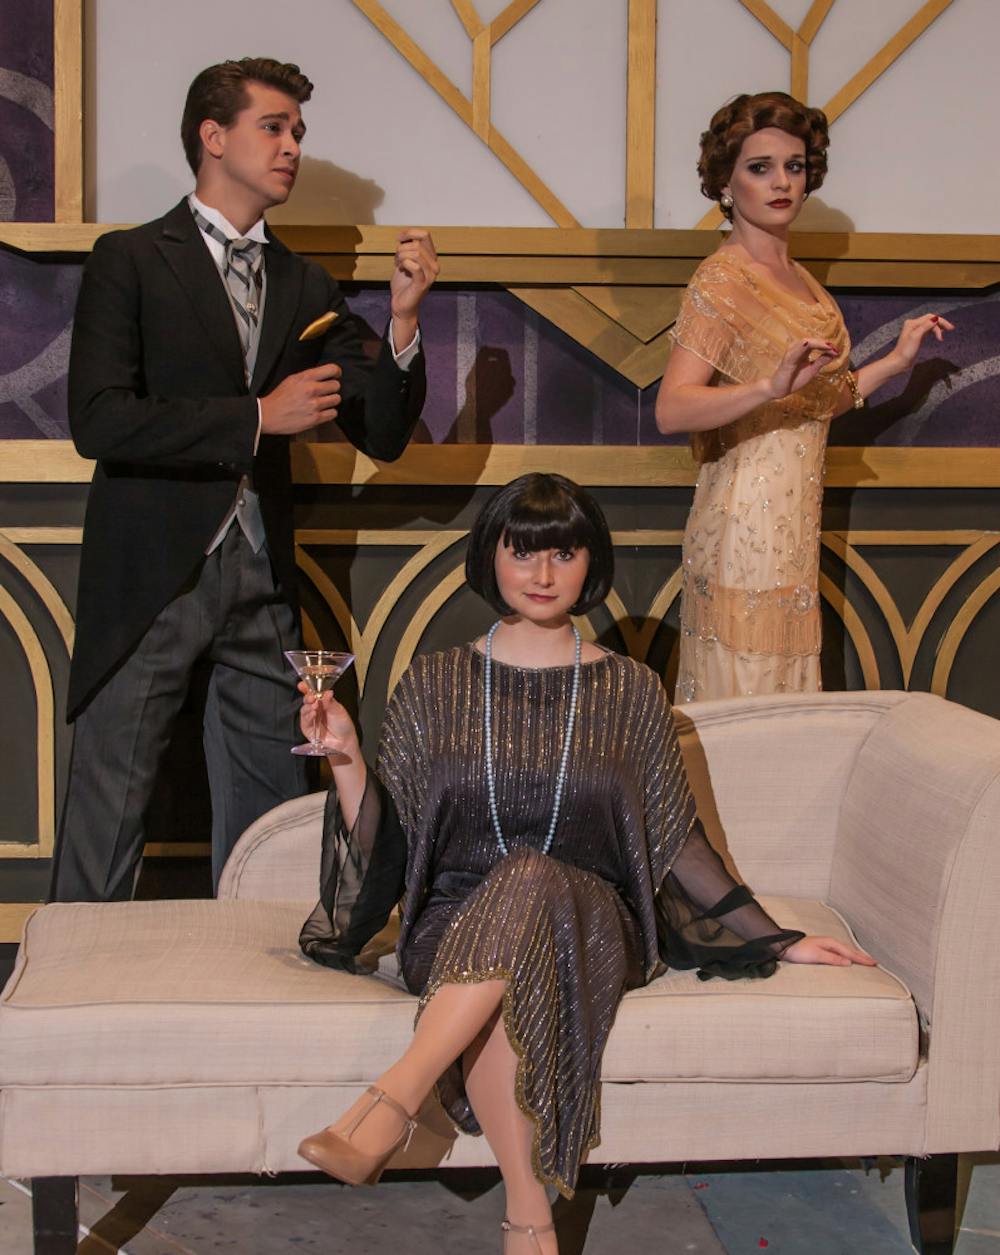 <p dir="ltr" align="justify">The UF School of Theatre and Dance will premiere its fall musical, "The Drowsy Chaperone," at 7:30 p.m. on Oct. 15, 2015.</p>